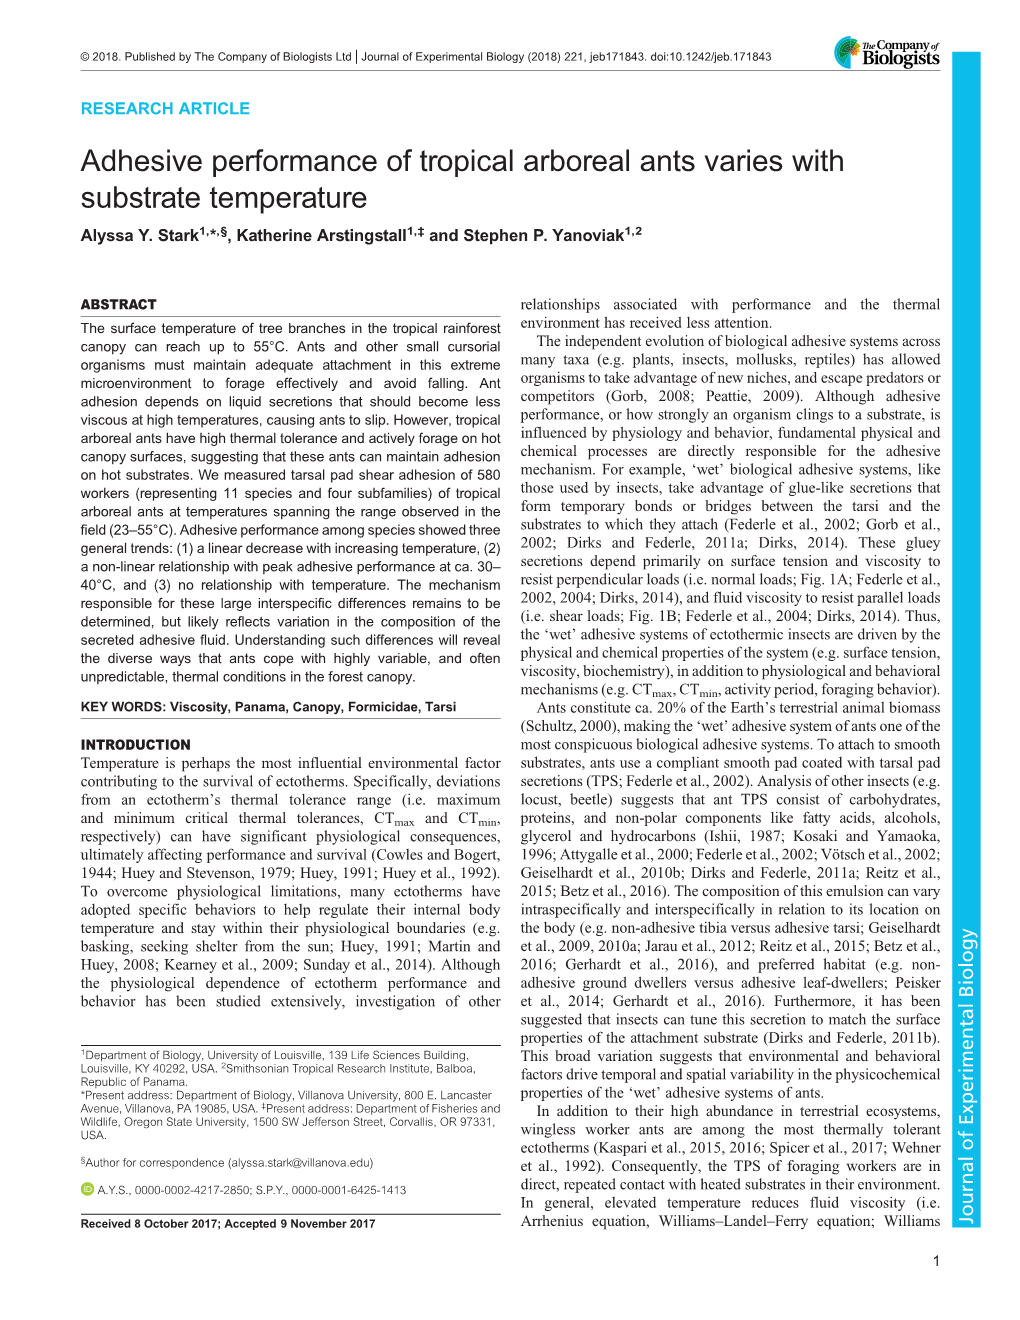 Adhesive Performance of Tropical Arboreal Ants Varies with Substrate Temperature Alyssa Y